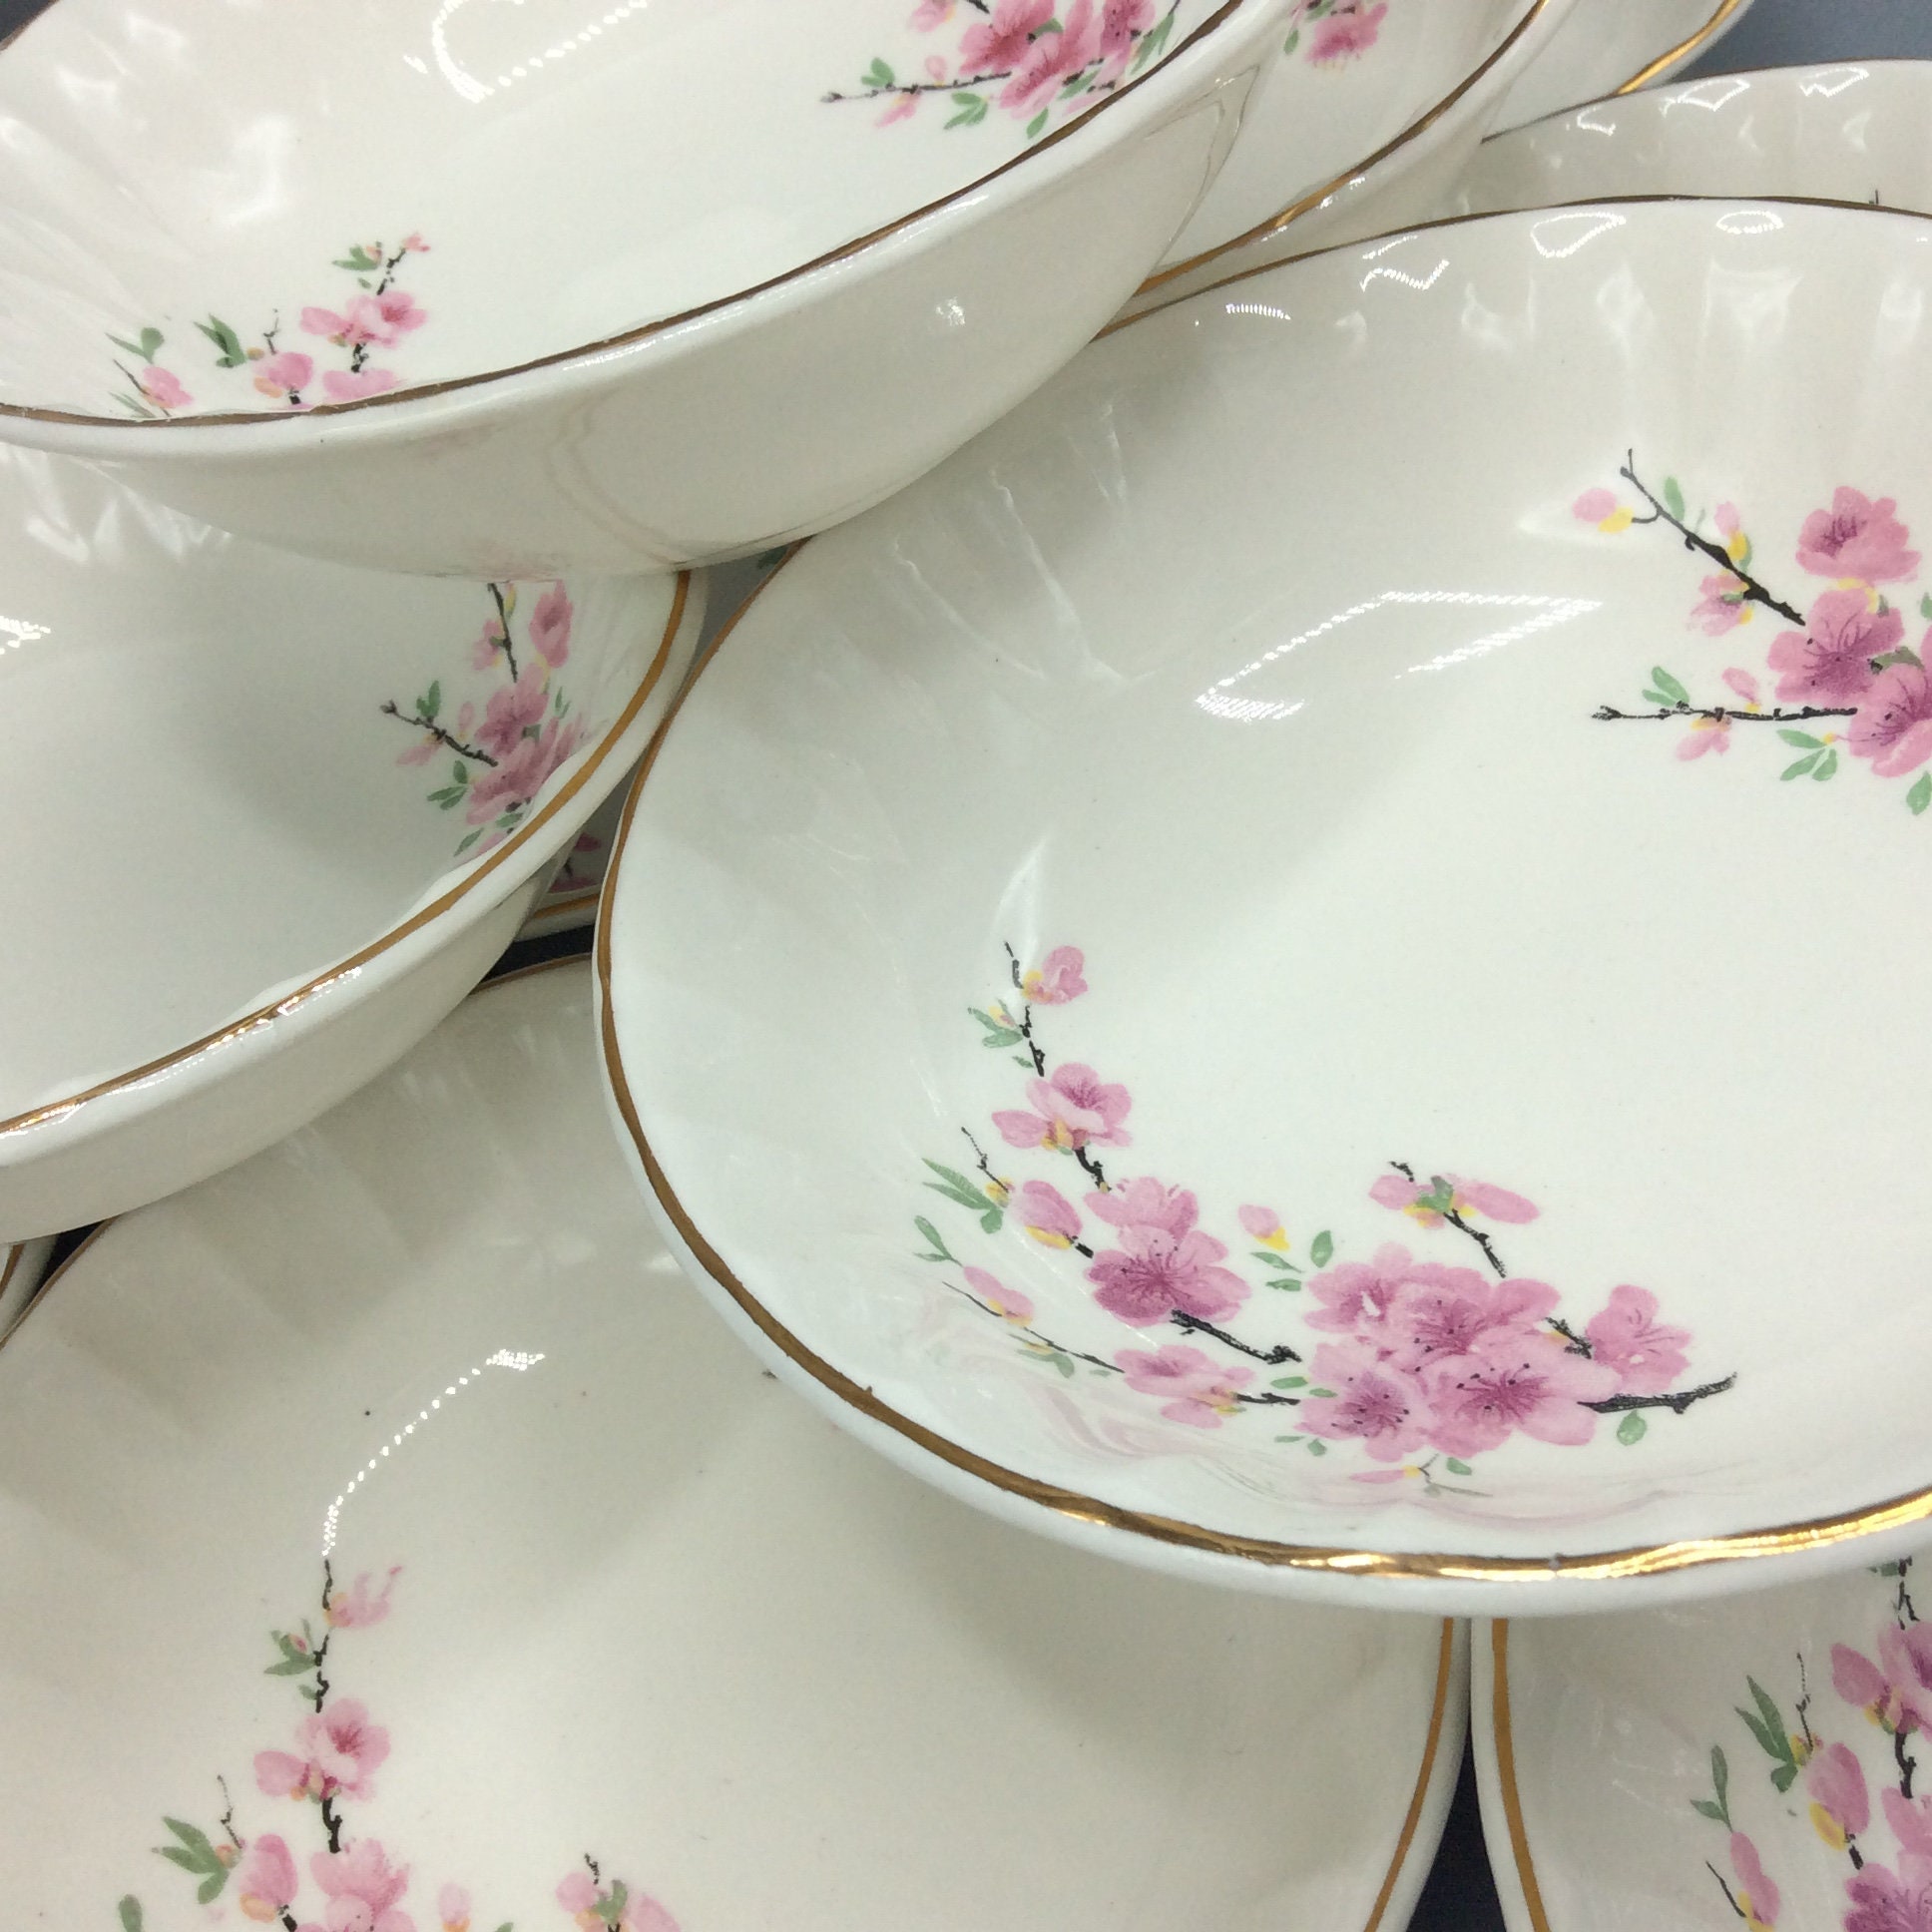 W S George China Peach Blossom Up/up Pattern Bolero Shape Bread & Butter  Plates Set of 4 2 Sets Available Shipping Included 